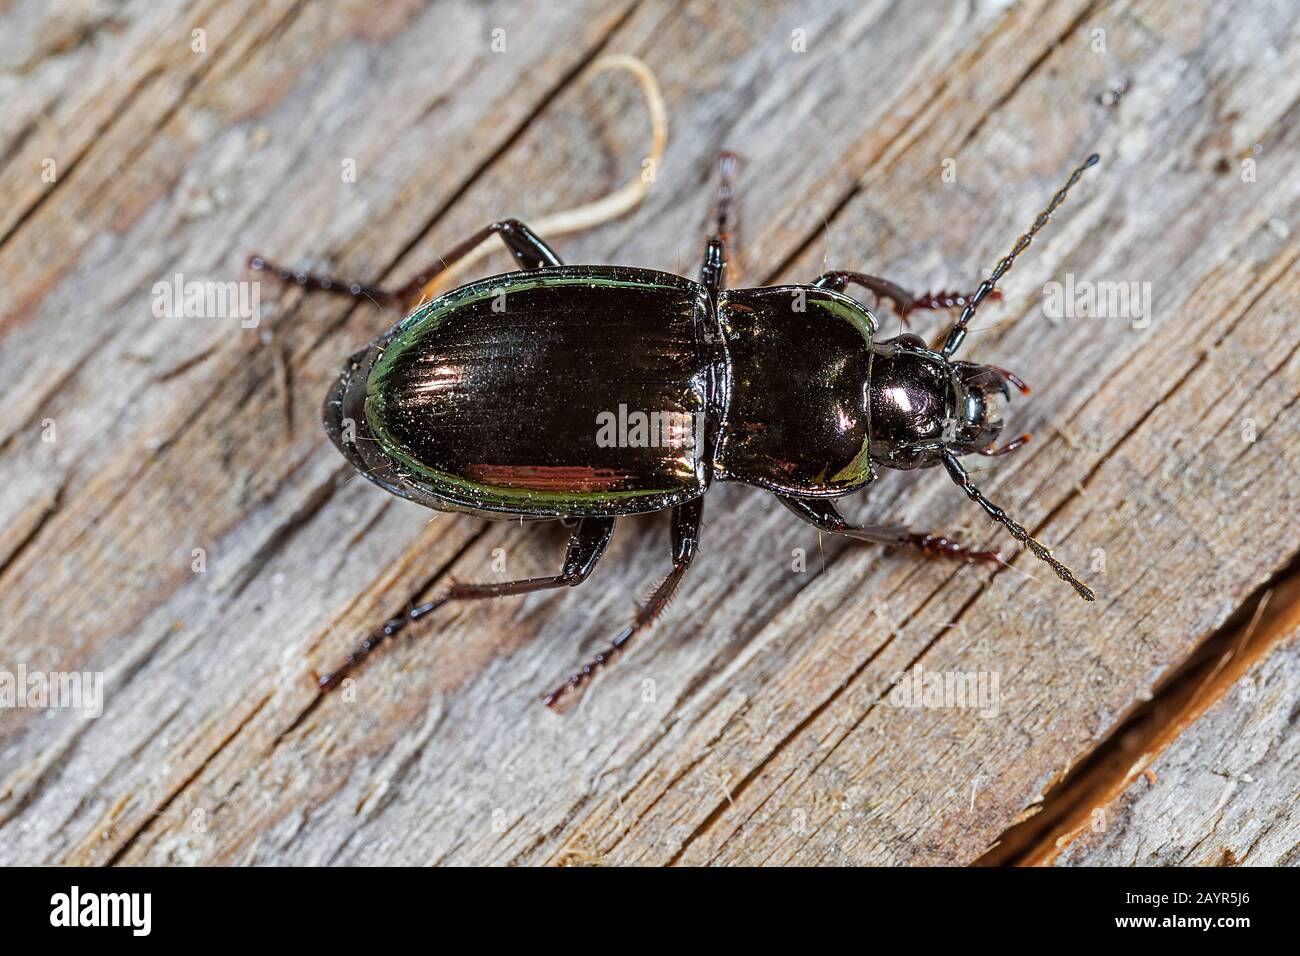 Cloaker (Pterostichus burmeisteri, Pterostichus metallicus, Pterostichus metallica), sitting on wood, view from above, Germany Stock Photo